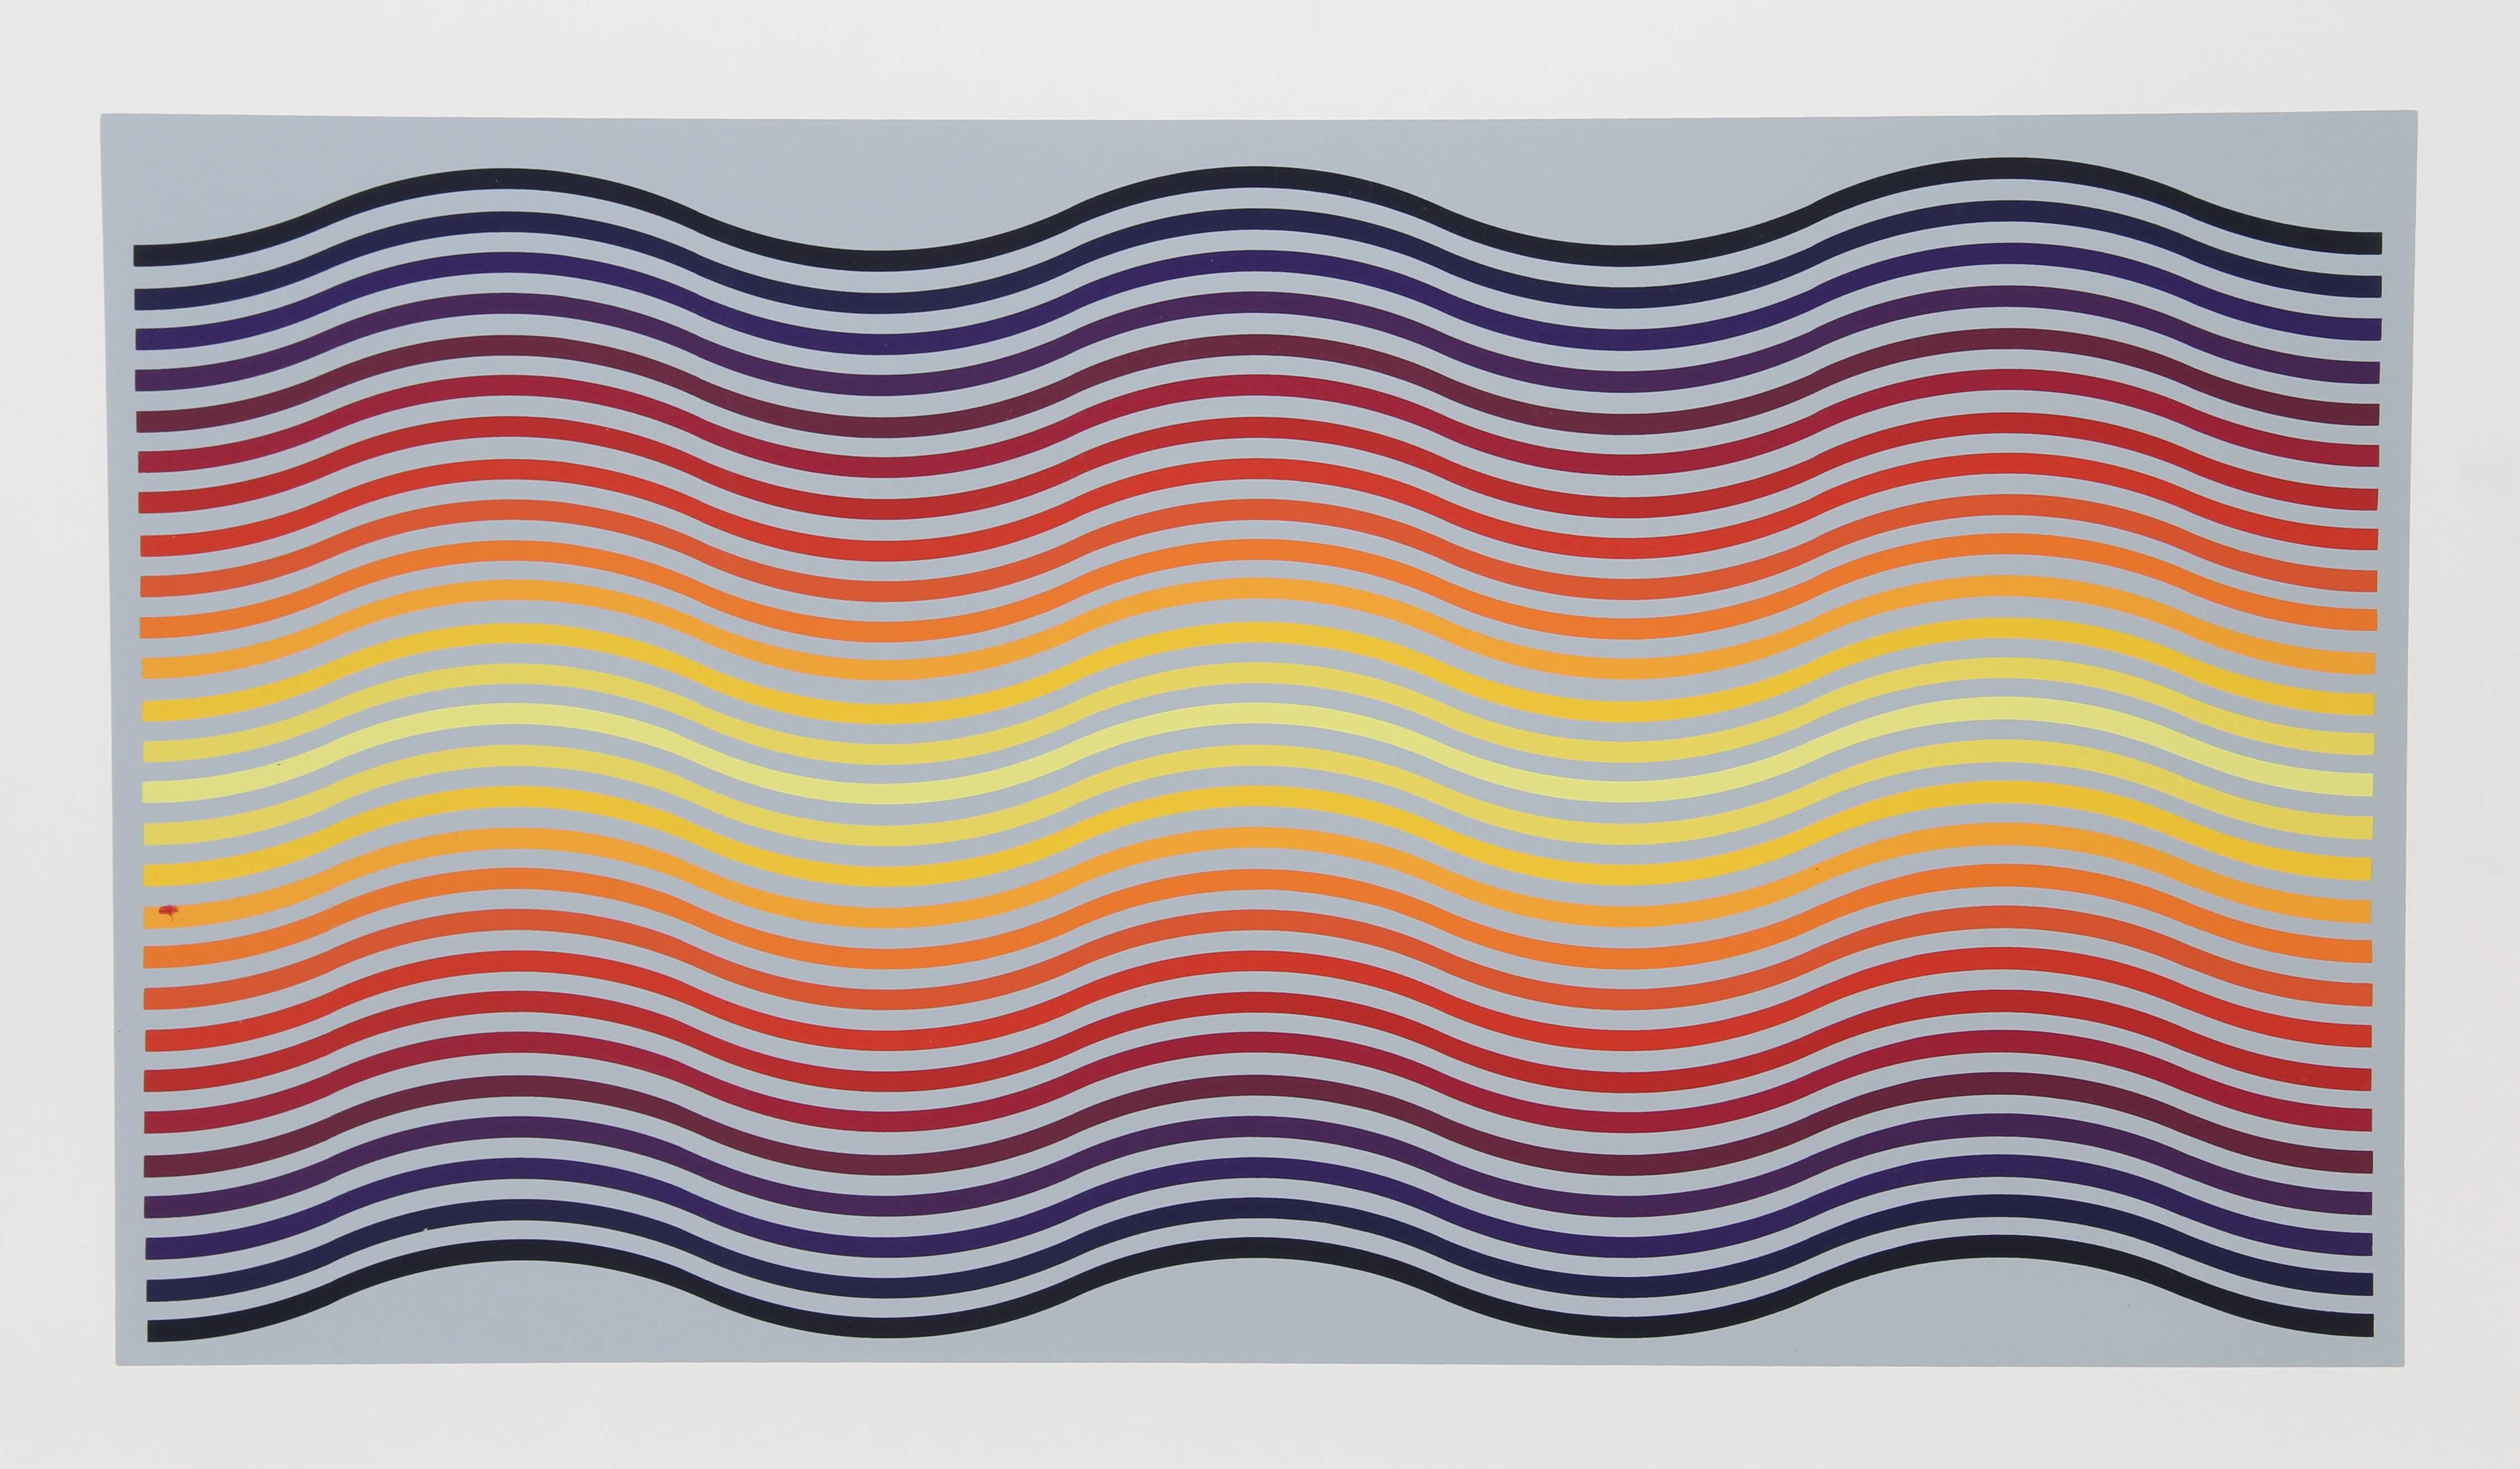 Artist:  Jurgen Peters, German (1936 - )
Title:  Rainbow Waves
Year:  1981
Medium:  Serigraph, signed and numbered in pencil
Edition:  250, AP 30
Image Size:  18.5 x 34 inches
Size:  22.5 in. x 38 in. (57.15 cm x 96.52 cm)